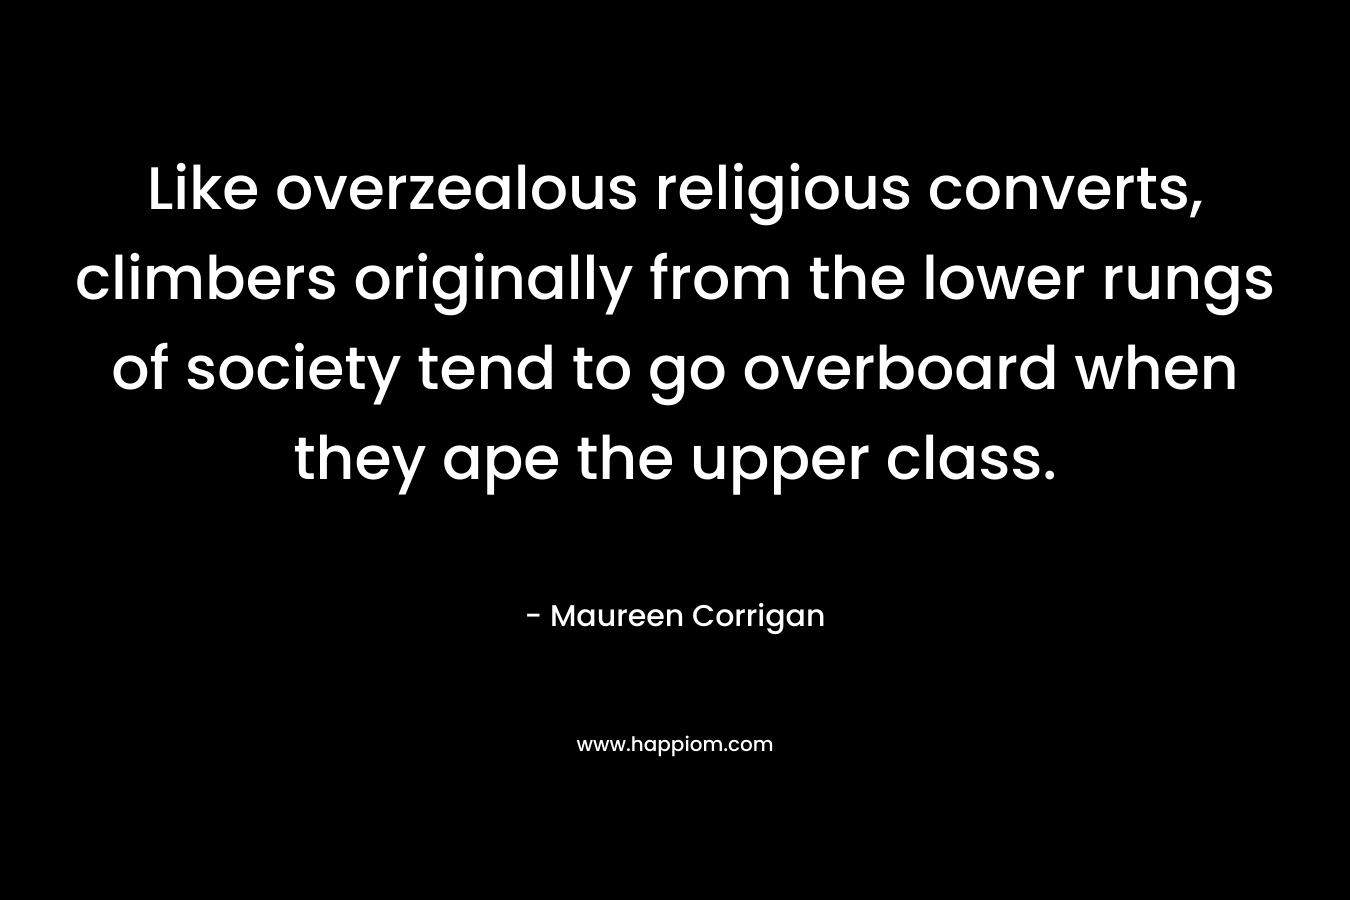 Like overzealous religious converts, climbers originally from the lower rungs of society tend to go overboard when they ape the upper class. – Maureen Corrigan